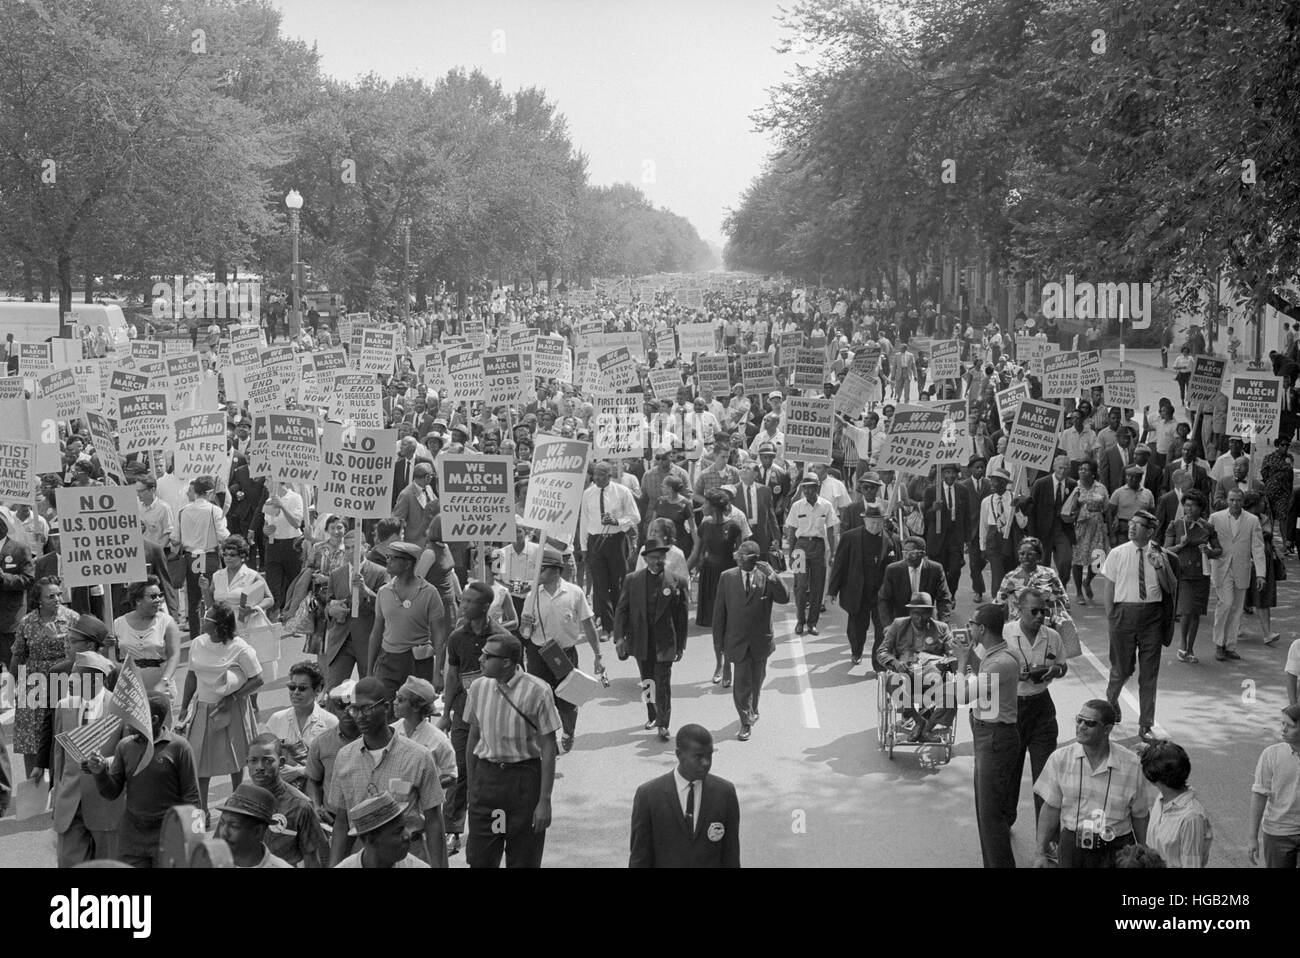 August 28, 1963 - A large group of activists at the March on Washington. Stock Photo